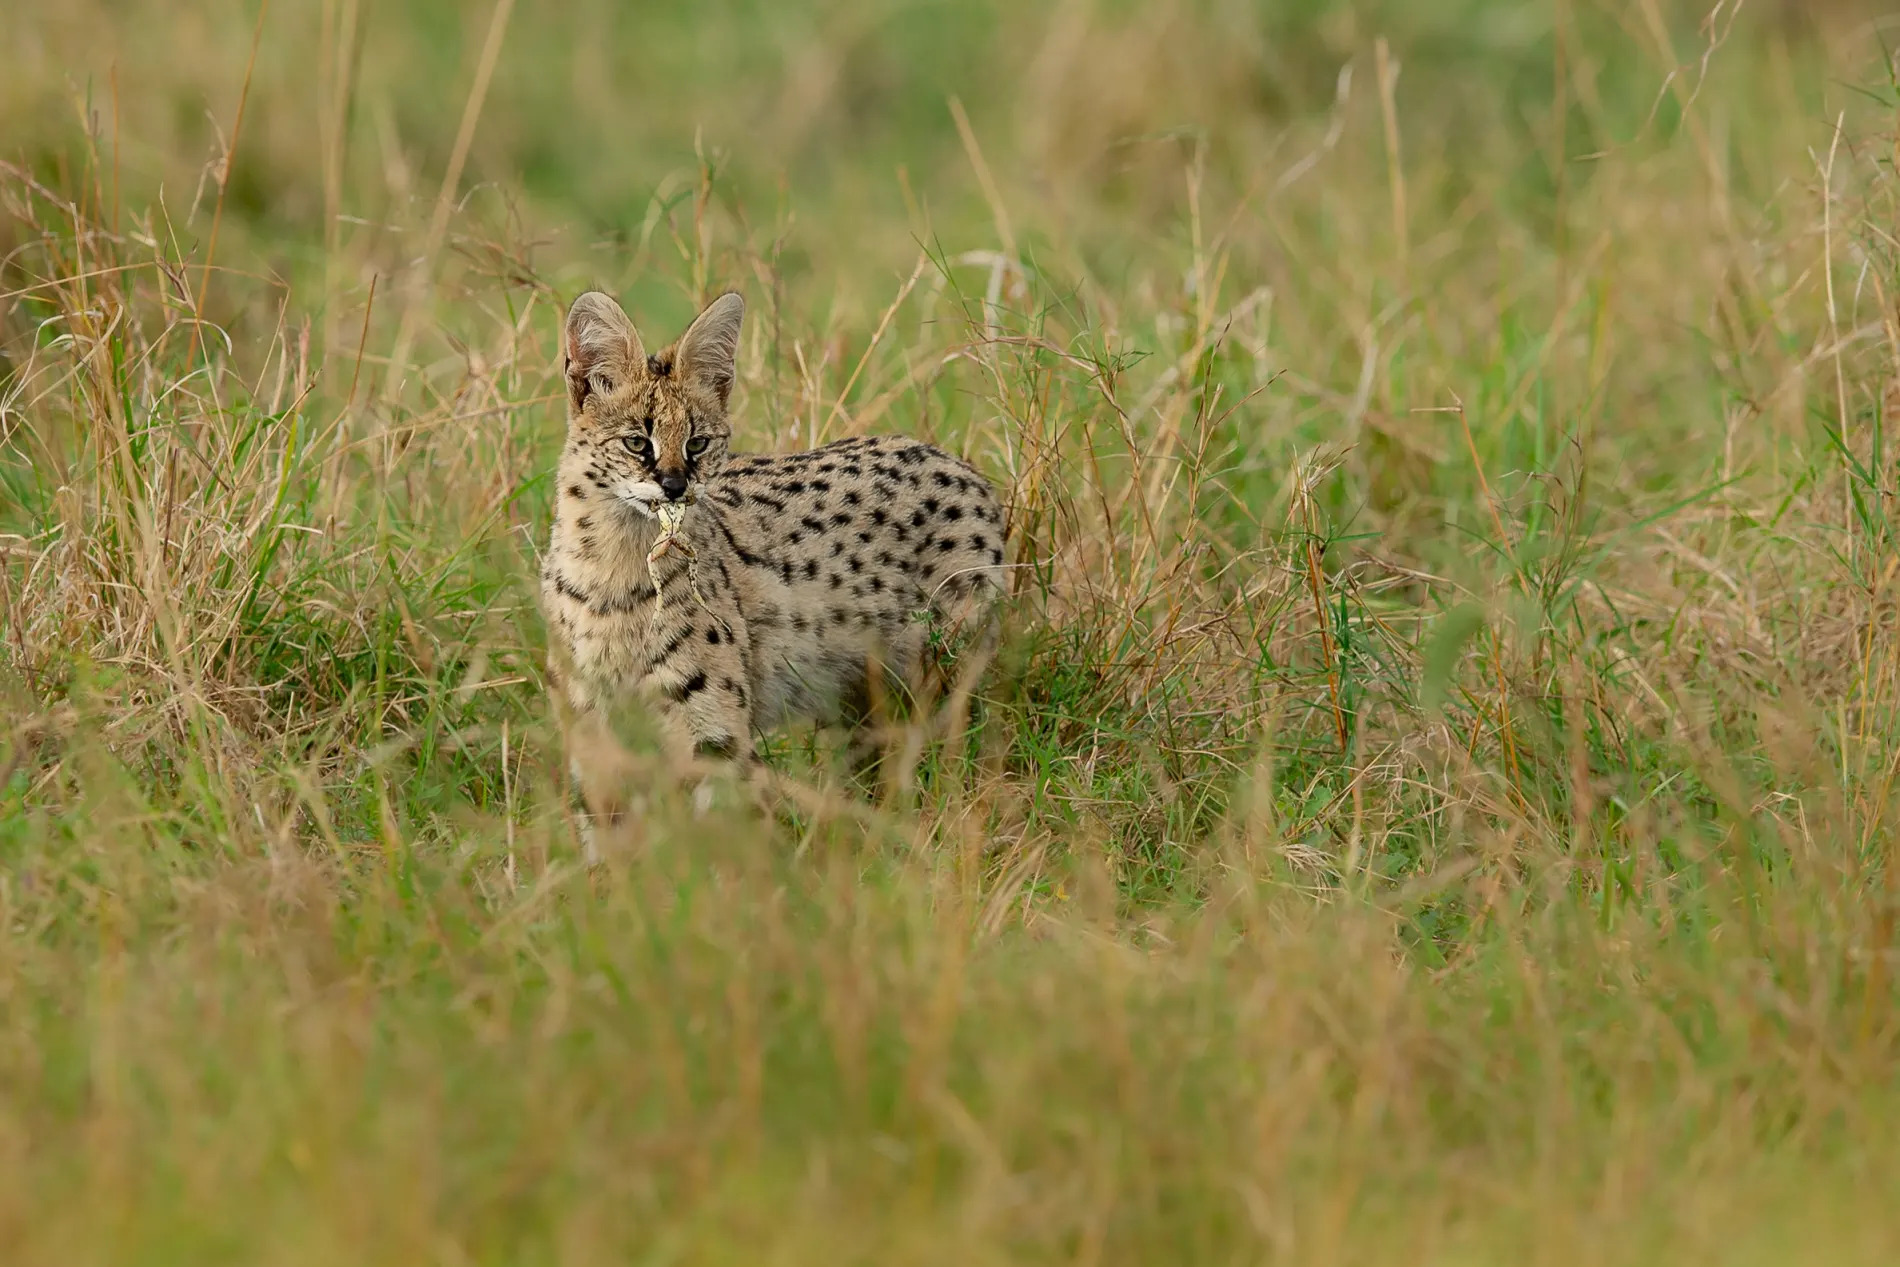 Serval cat with frog